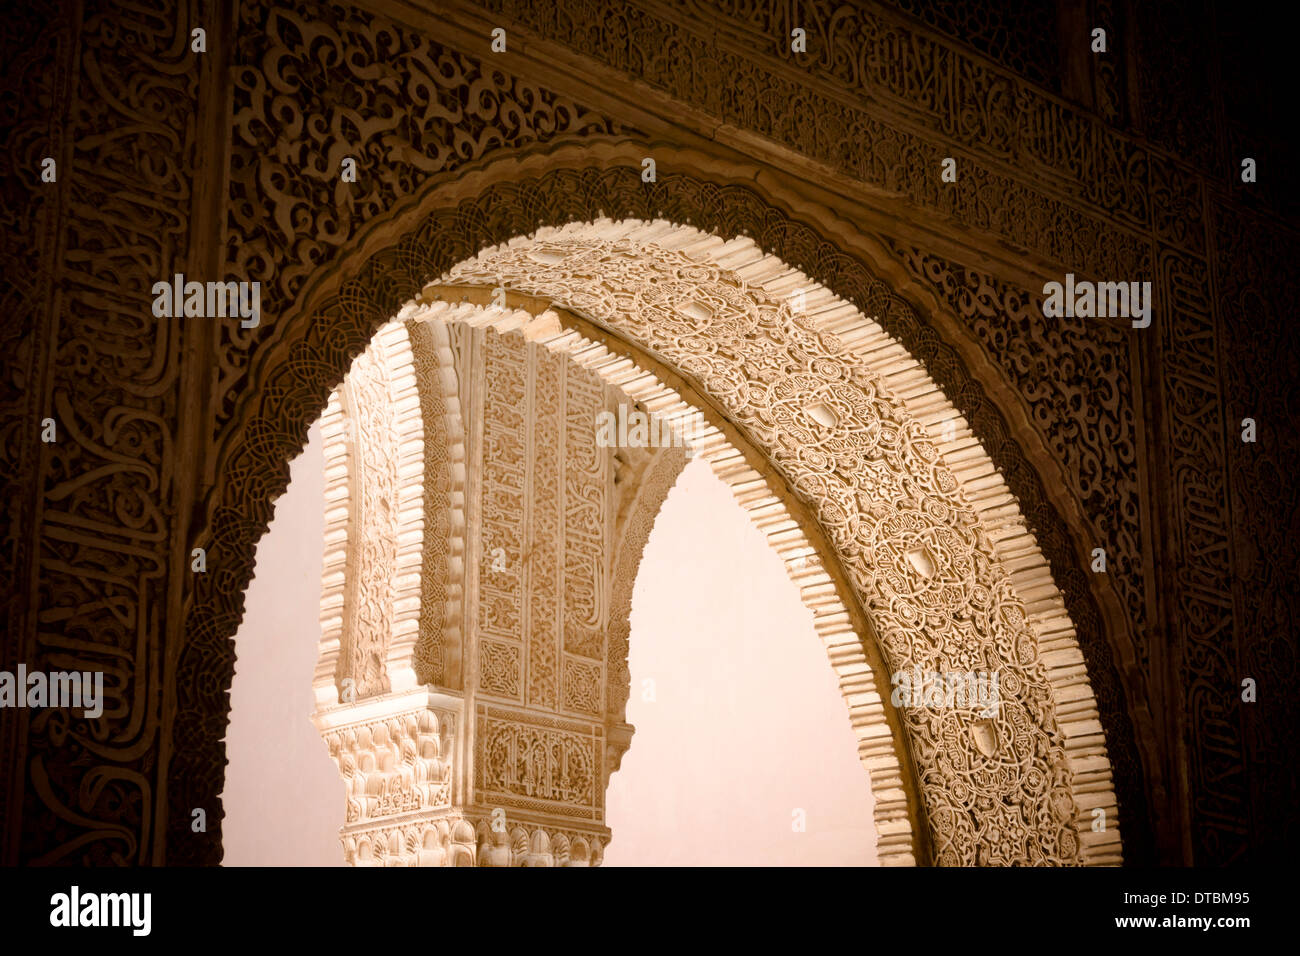 An ornate archway at the beautiful palace and gardens at Alhambra in Granada, Andalusia, southern Spain. Stock Photo